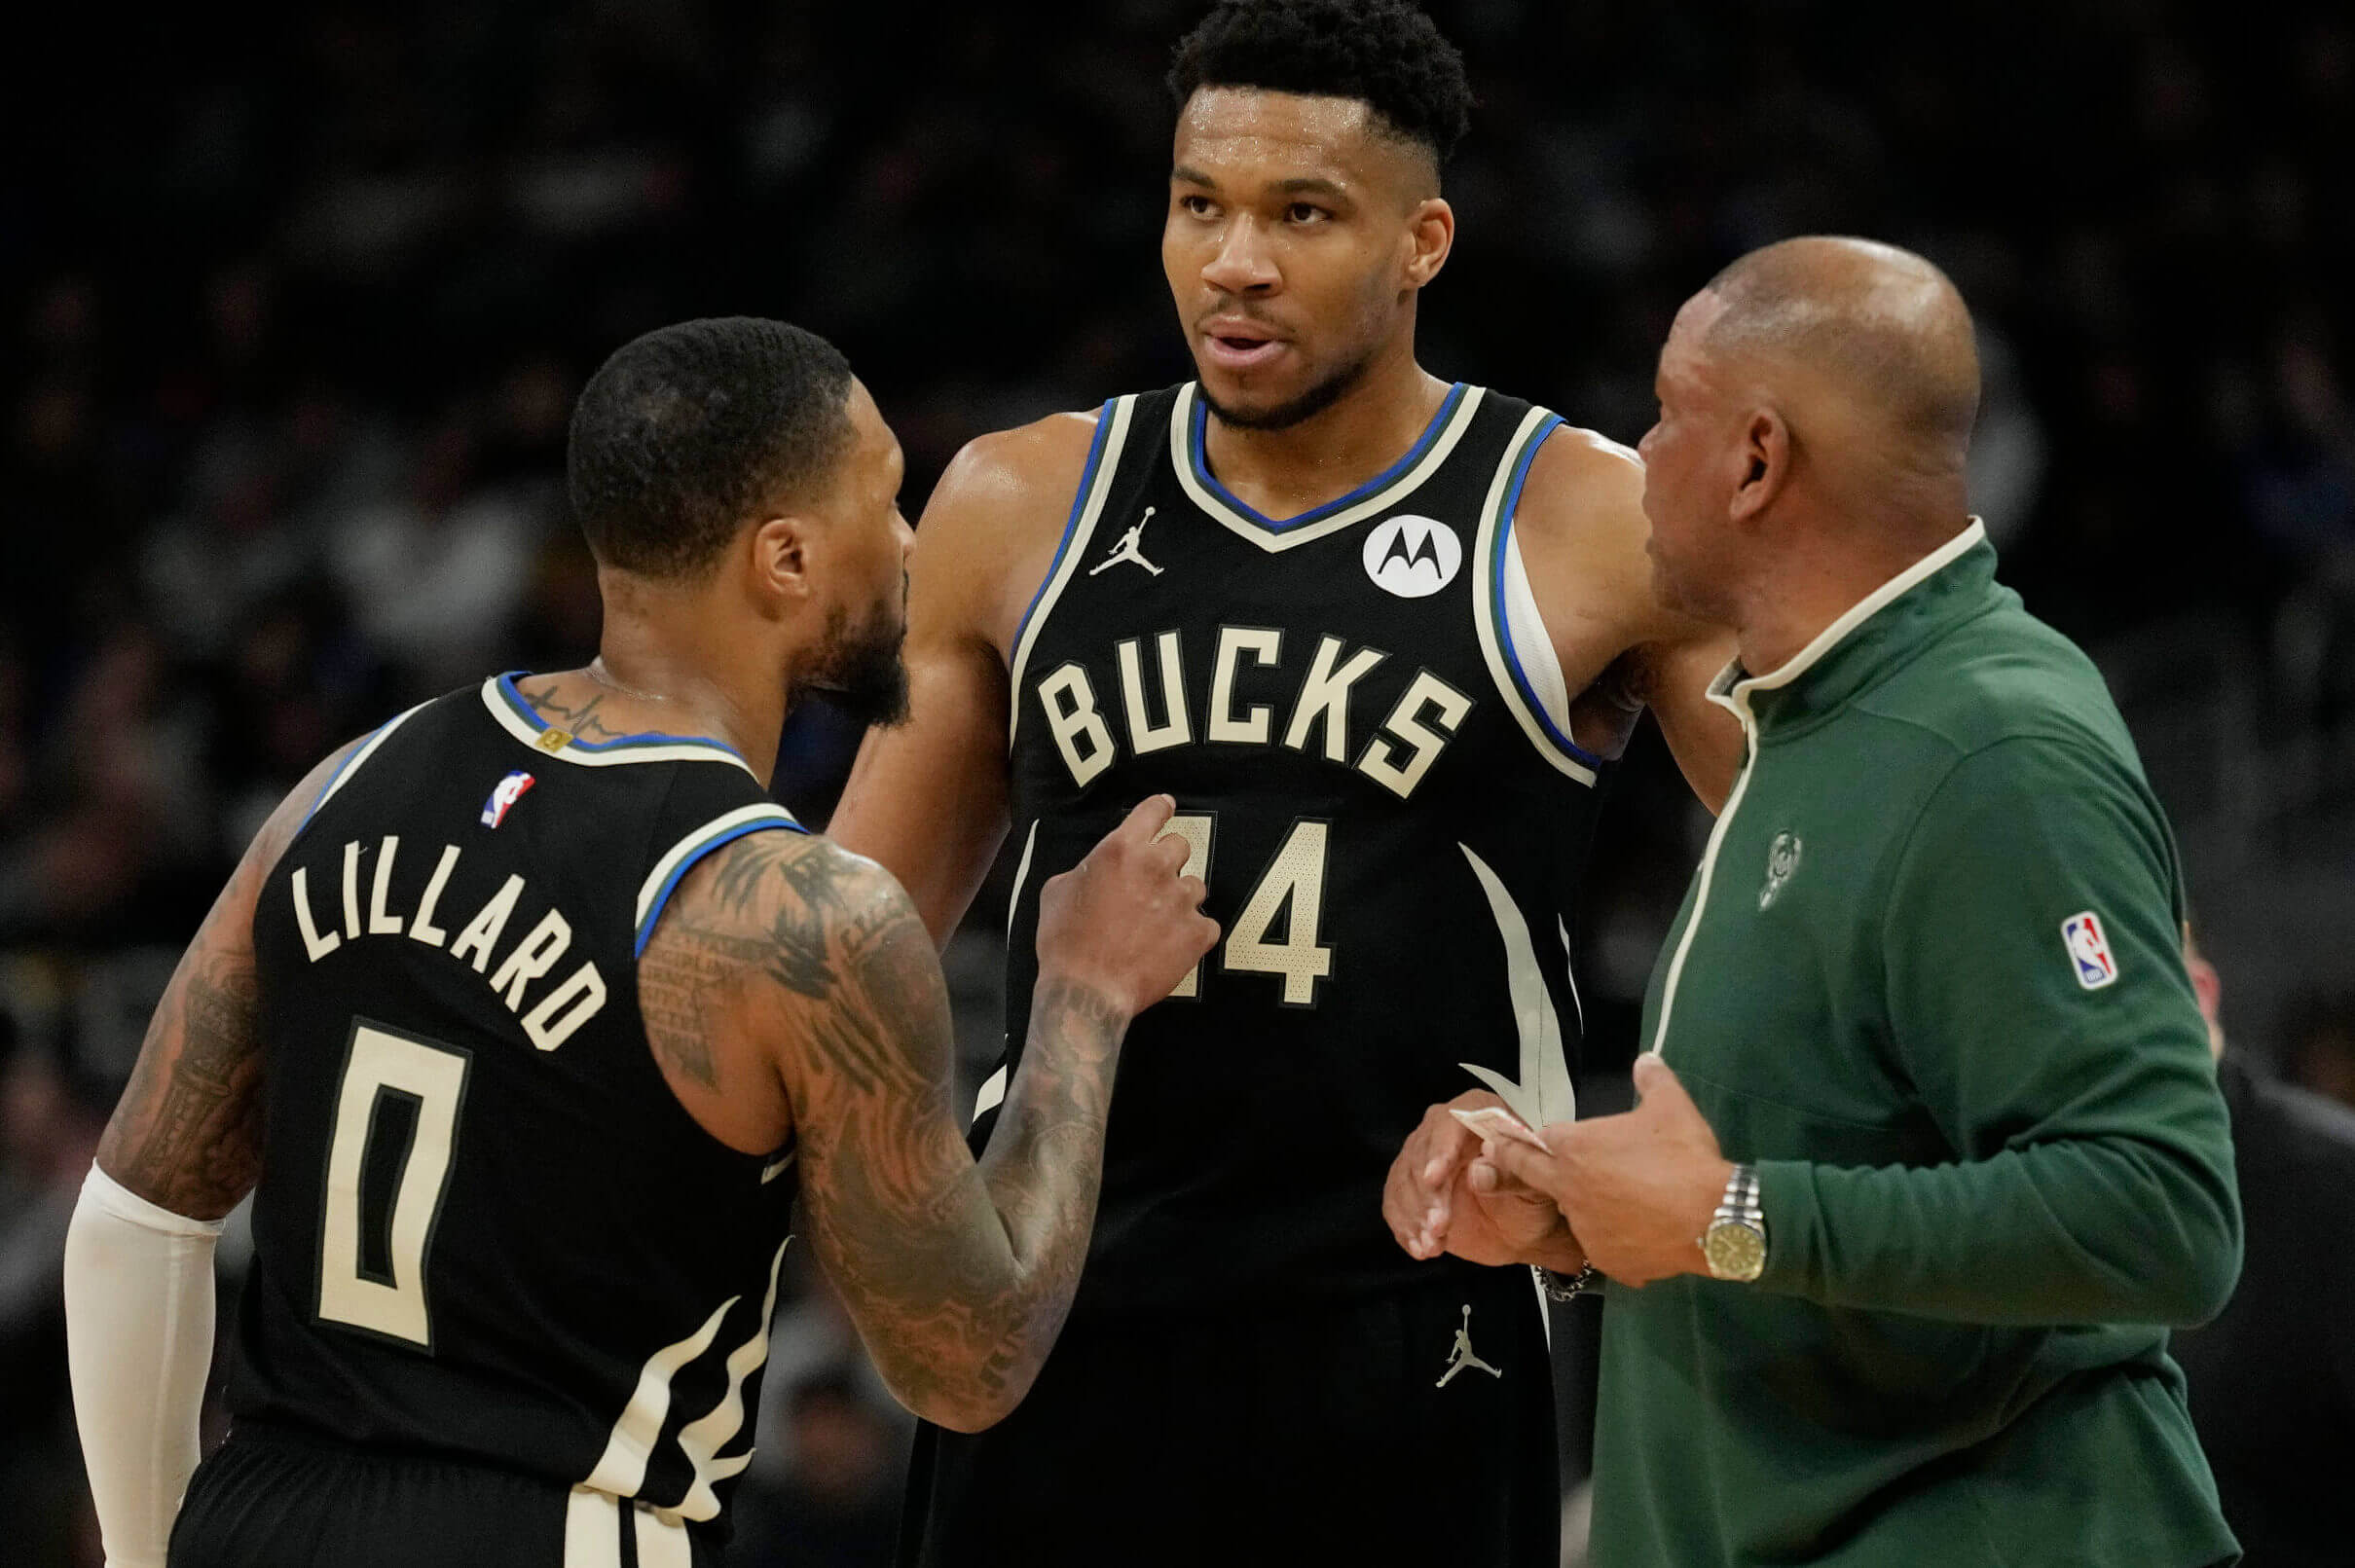 Despite losing skid, Bucks have ‘belief’ in what they have and what they can do